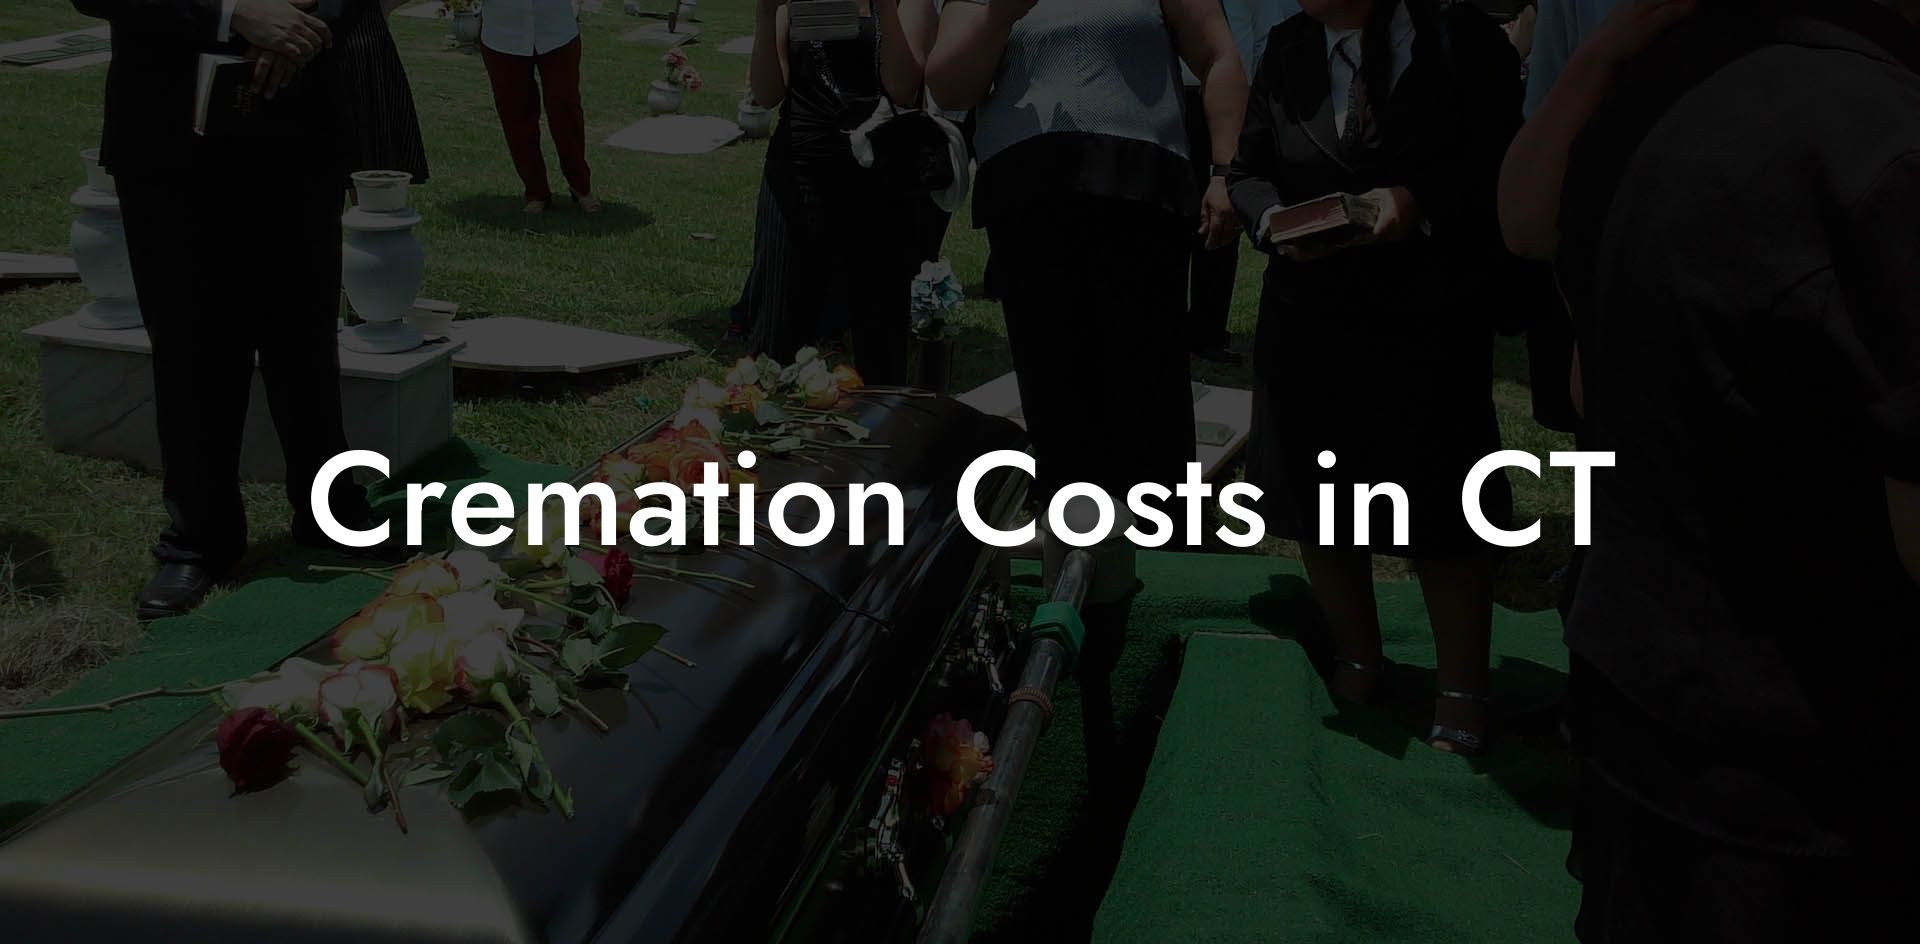 Cremation Costs in CT